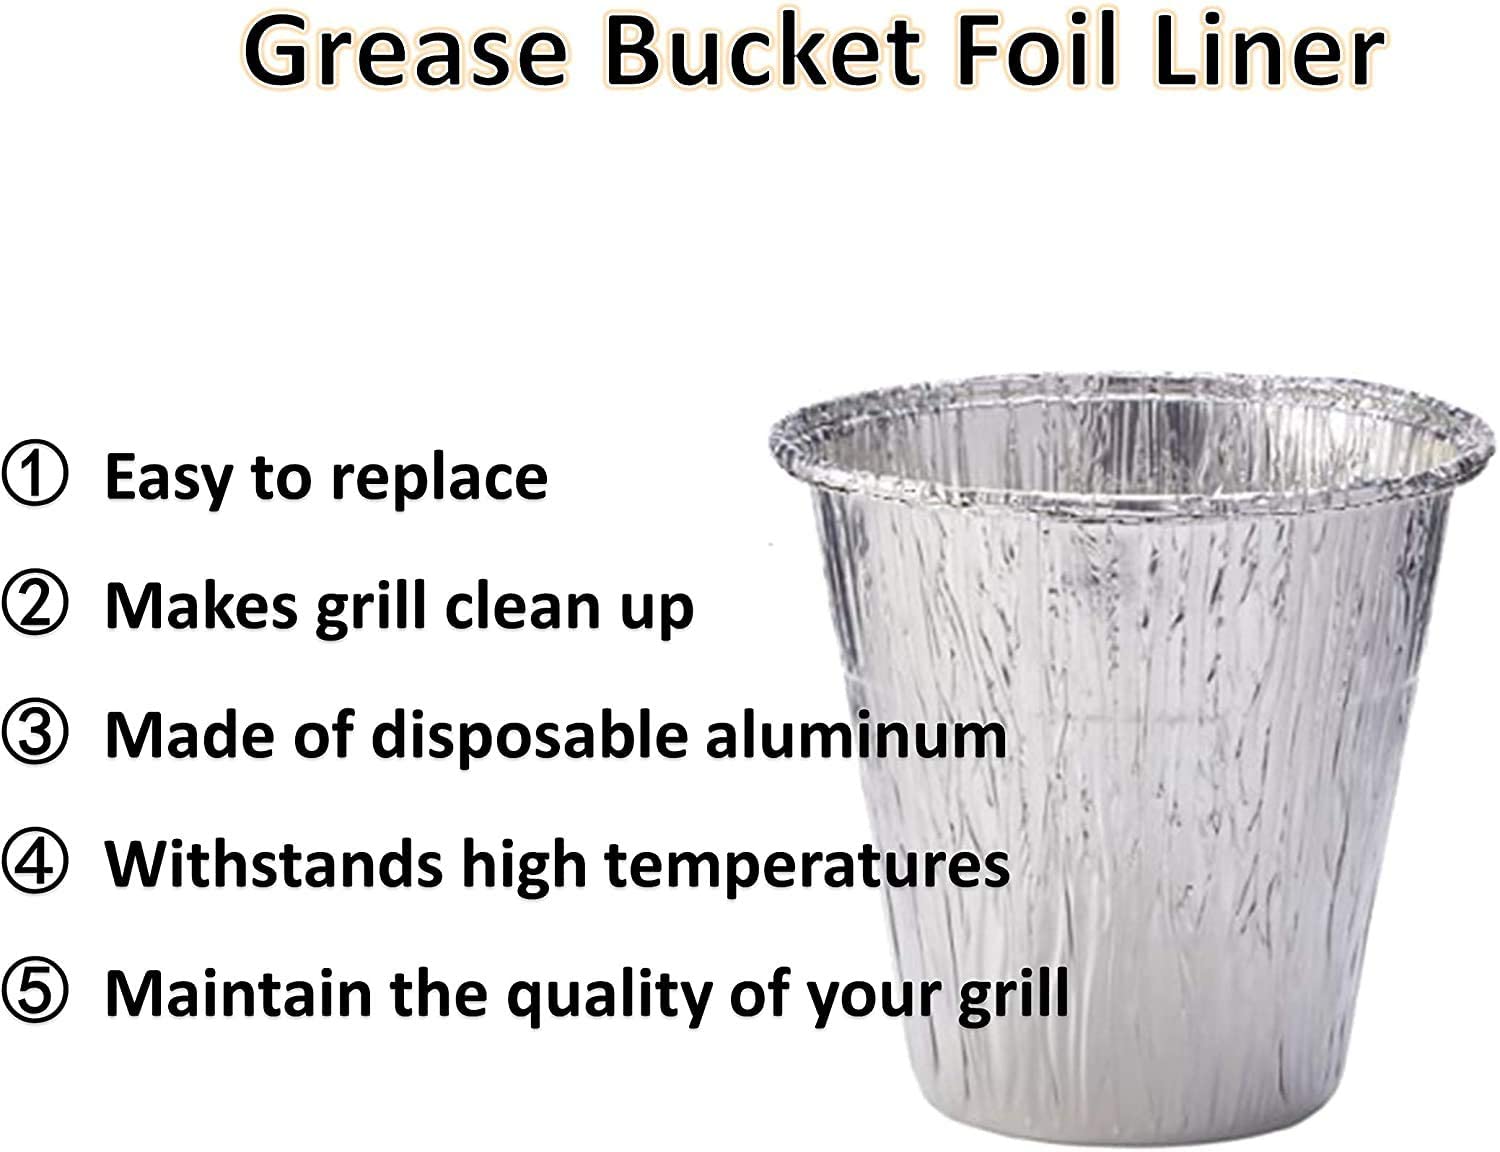 6 inch High Grease Bucket Liners Replacement for Pit Boss Grills 67292 Foil,Disposable Aluminum Drip Insert 